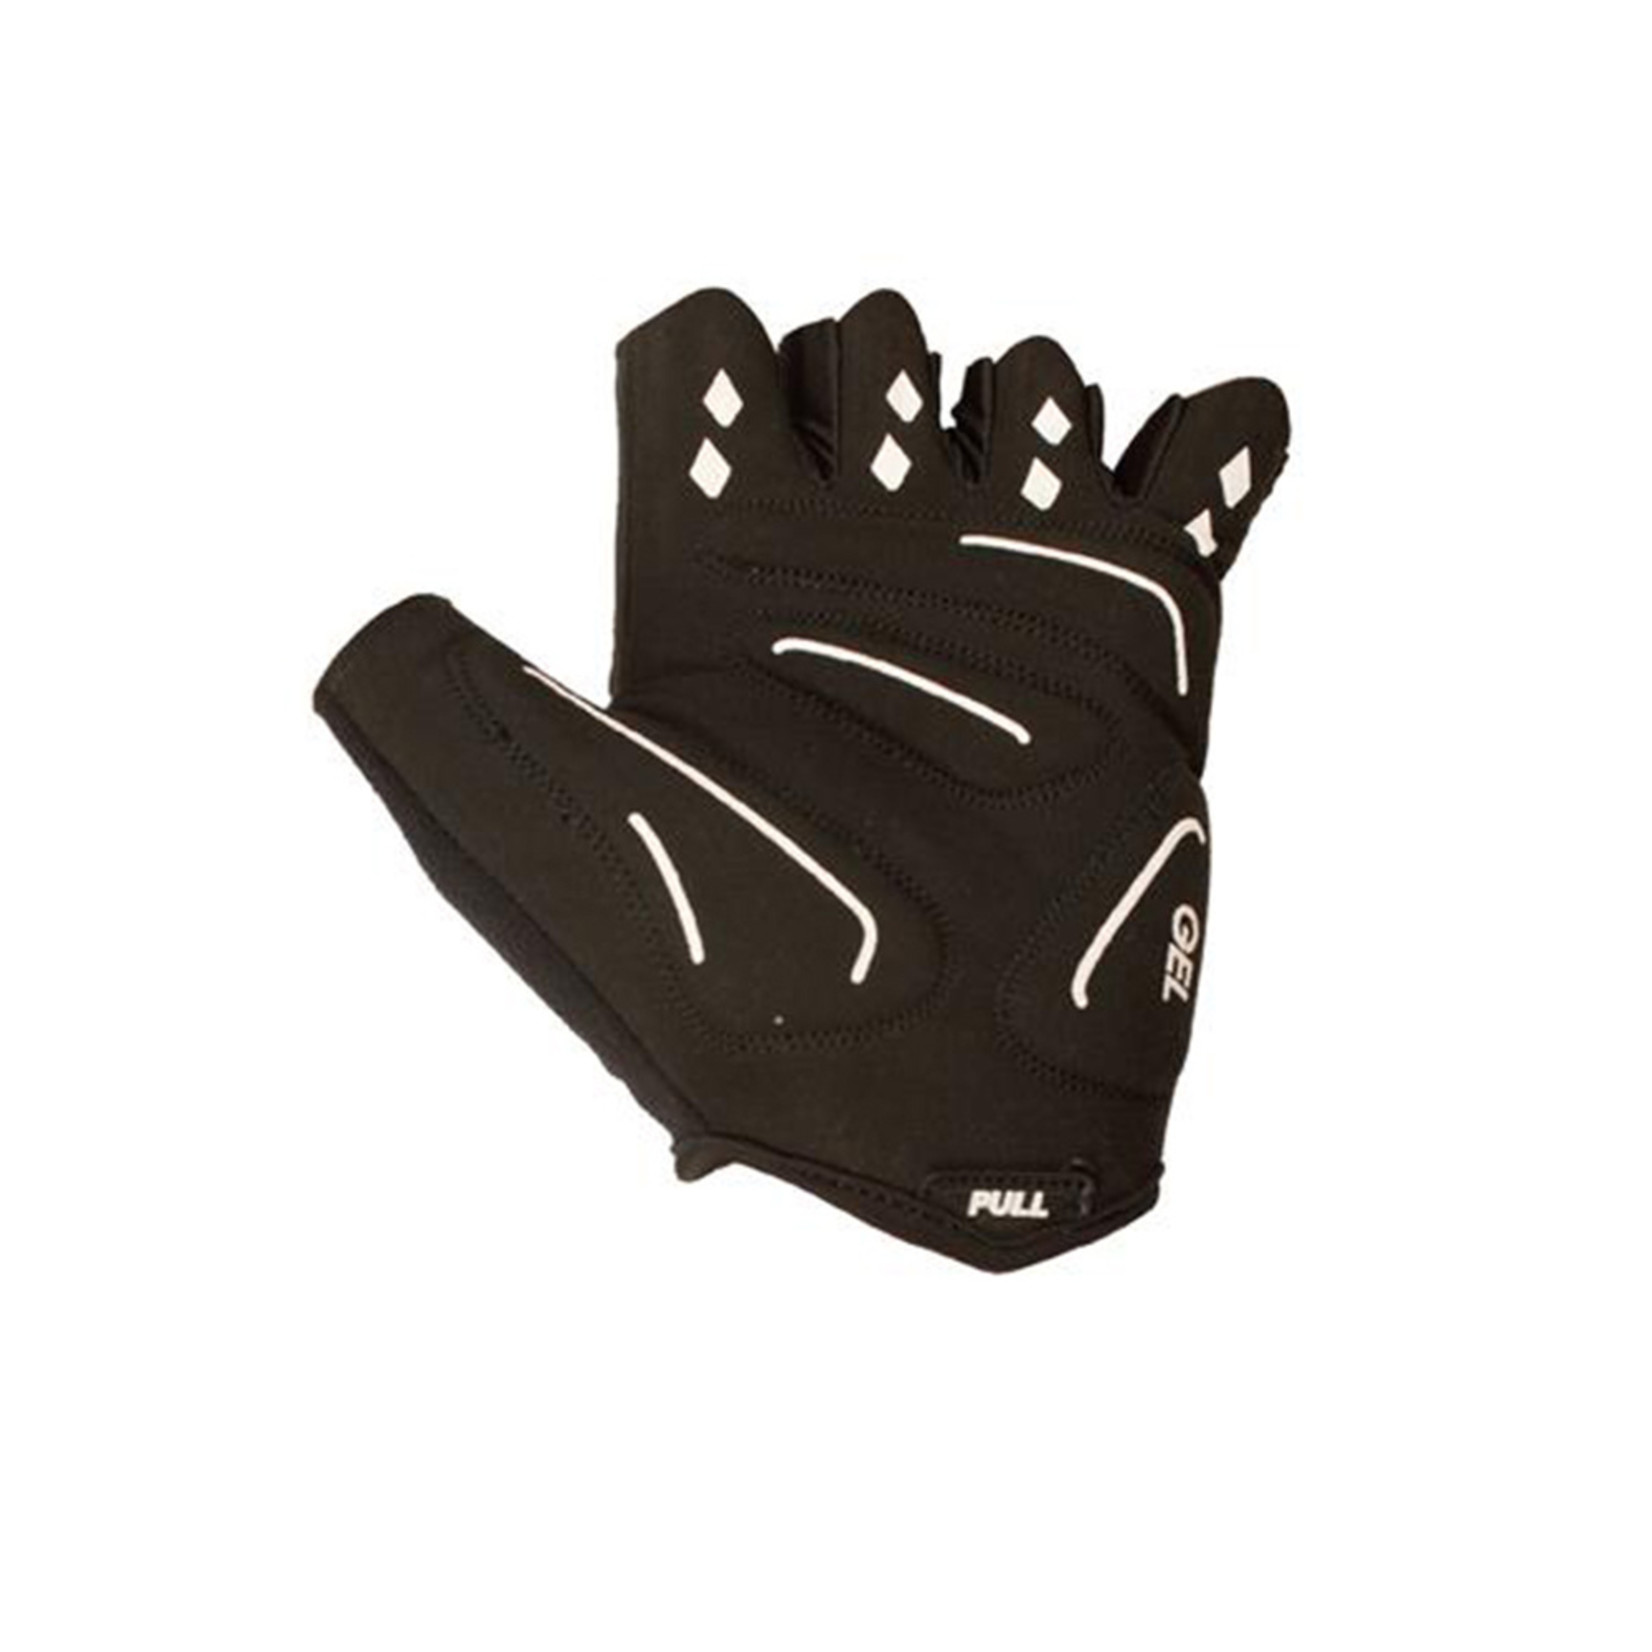 Azur Azur Bike/Cycling Glove - Synthetic Palm - S6 Series - Black - Small